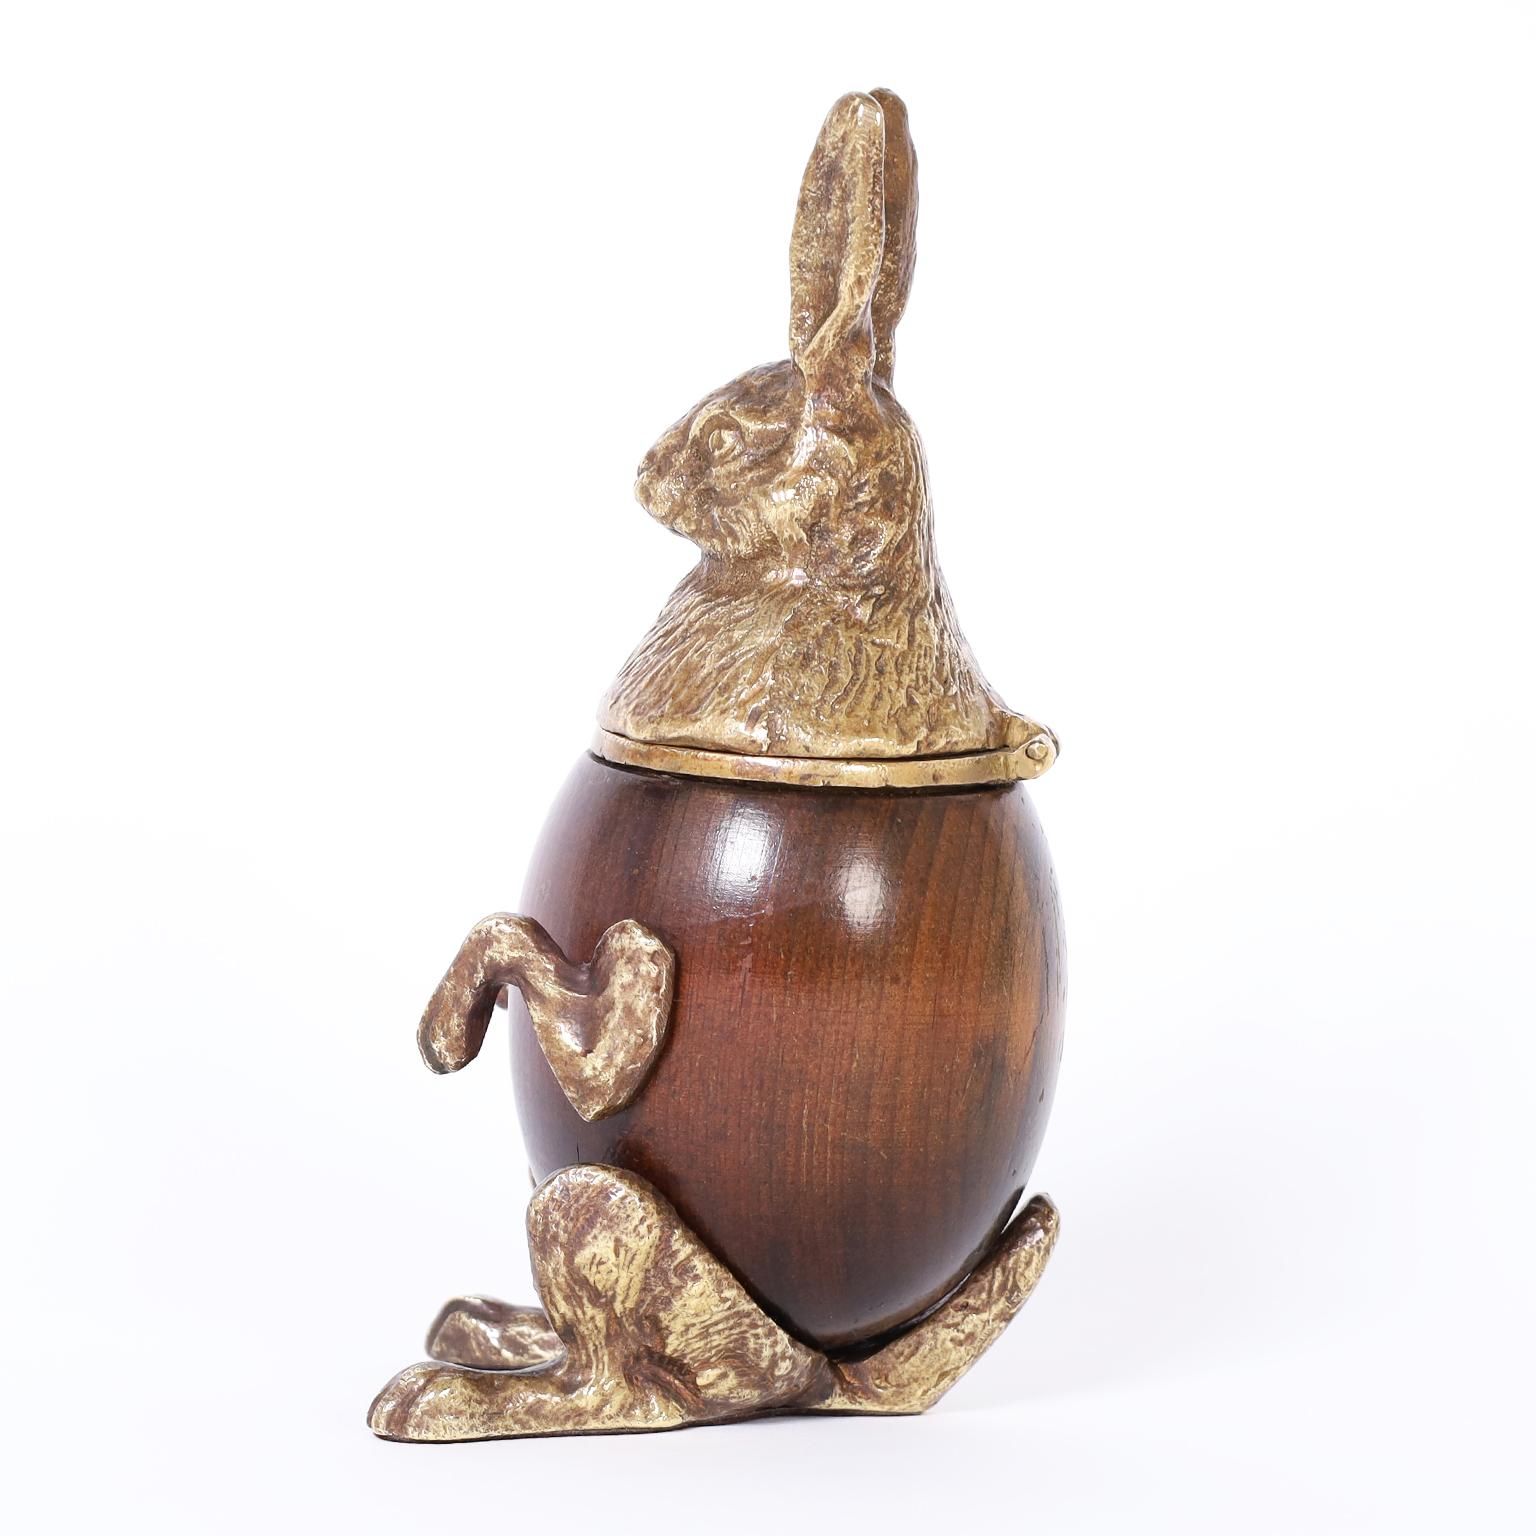 Rabbit box with a cast brass head, arms, and legs over a wood body stamped indistinctly Arthur Court 1976 on a leg.